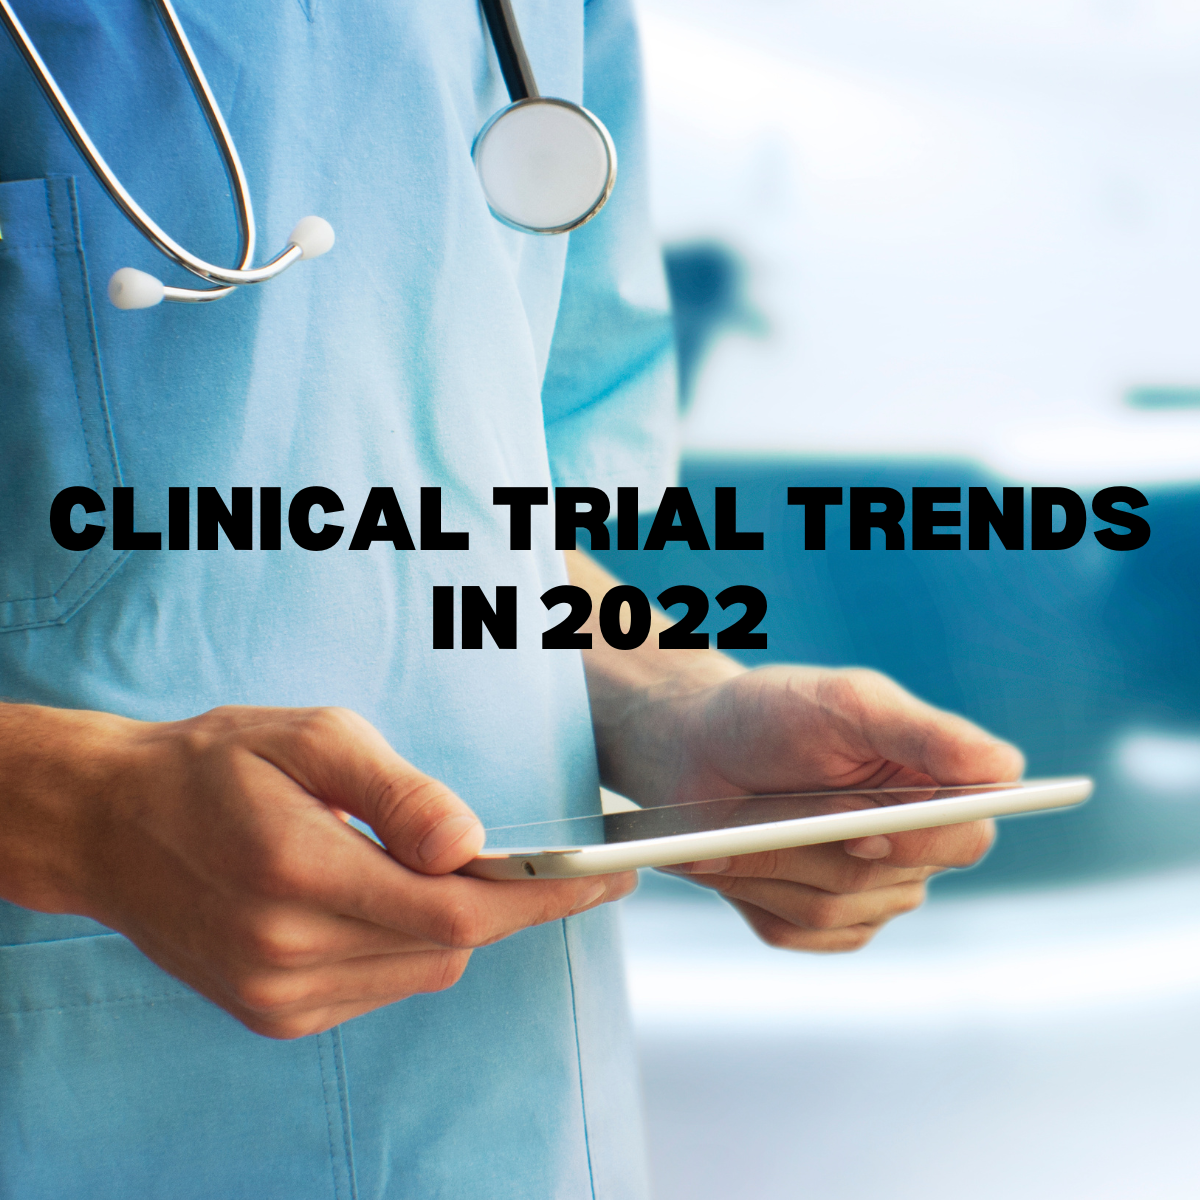 Clinical Trial Trends in 2022